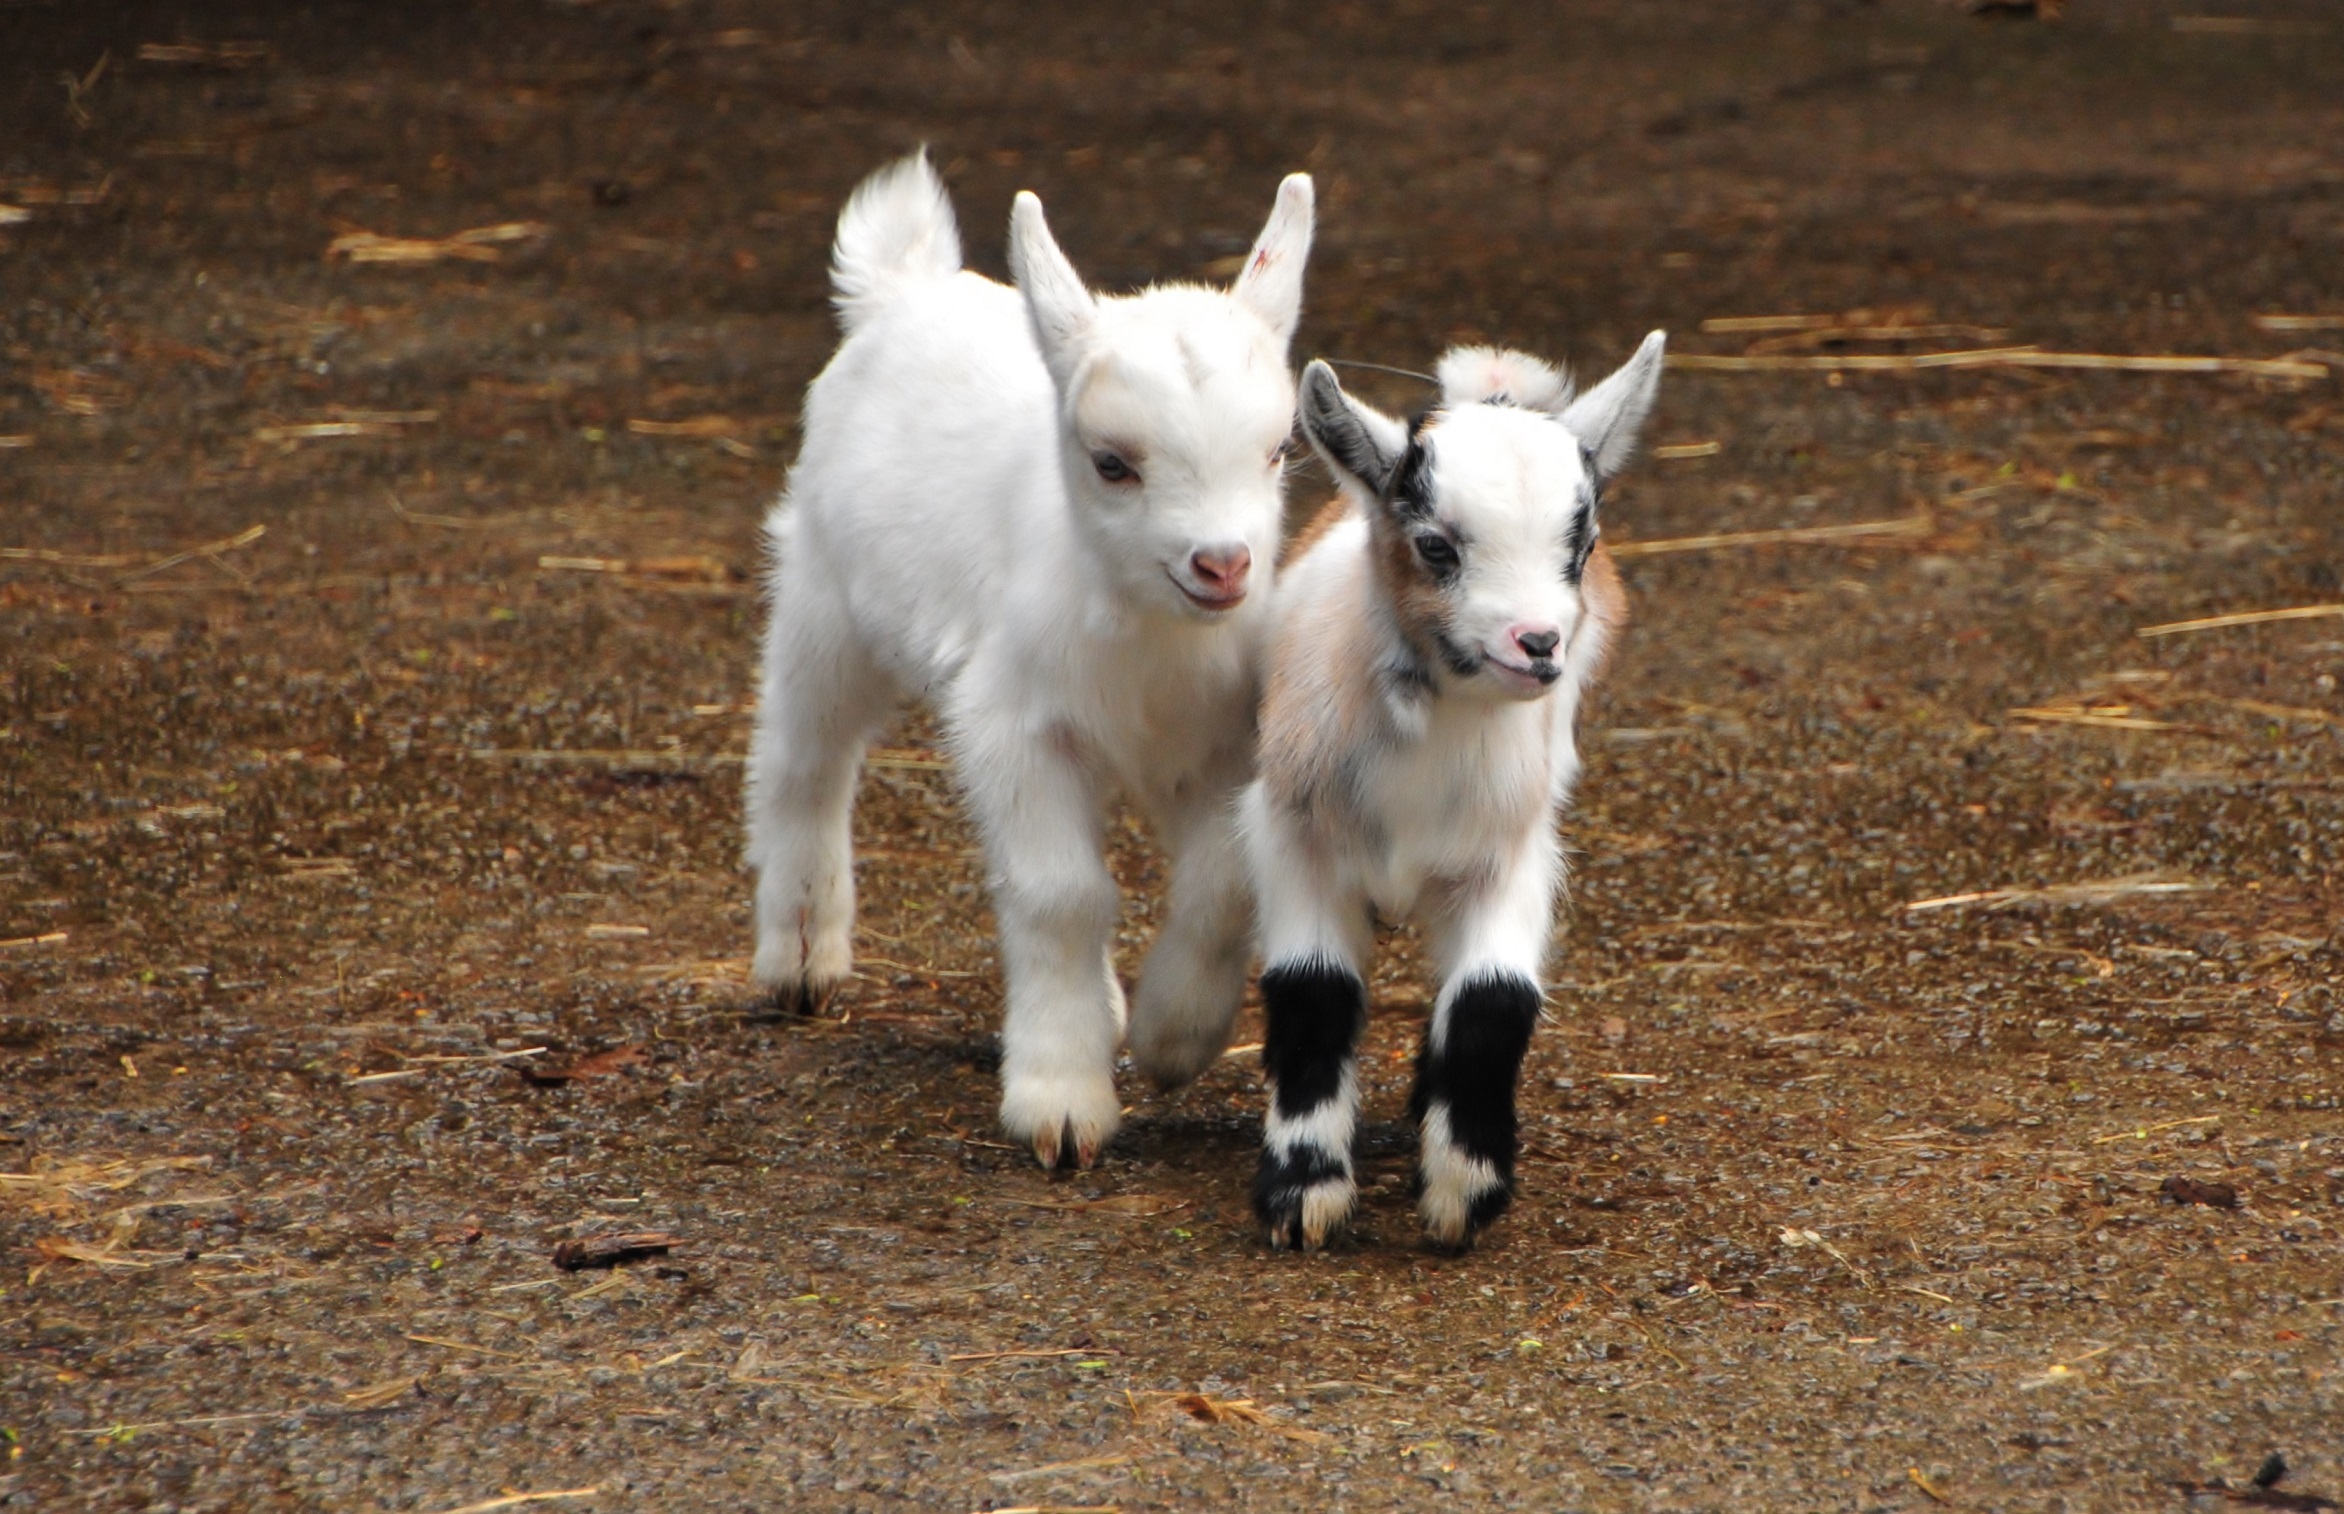 The African pygmy goats have welcomed new arrivals